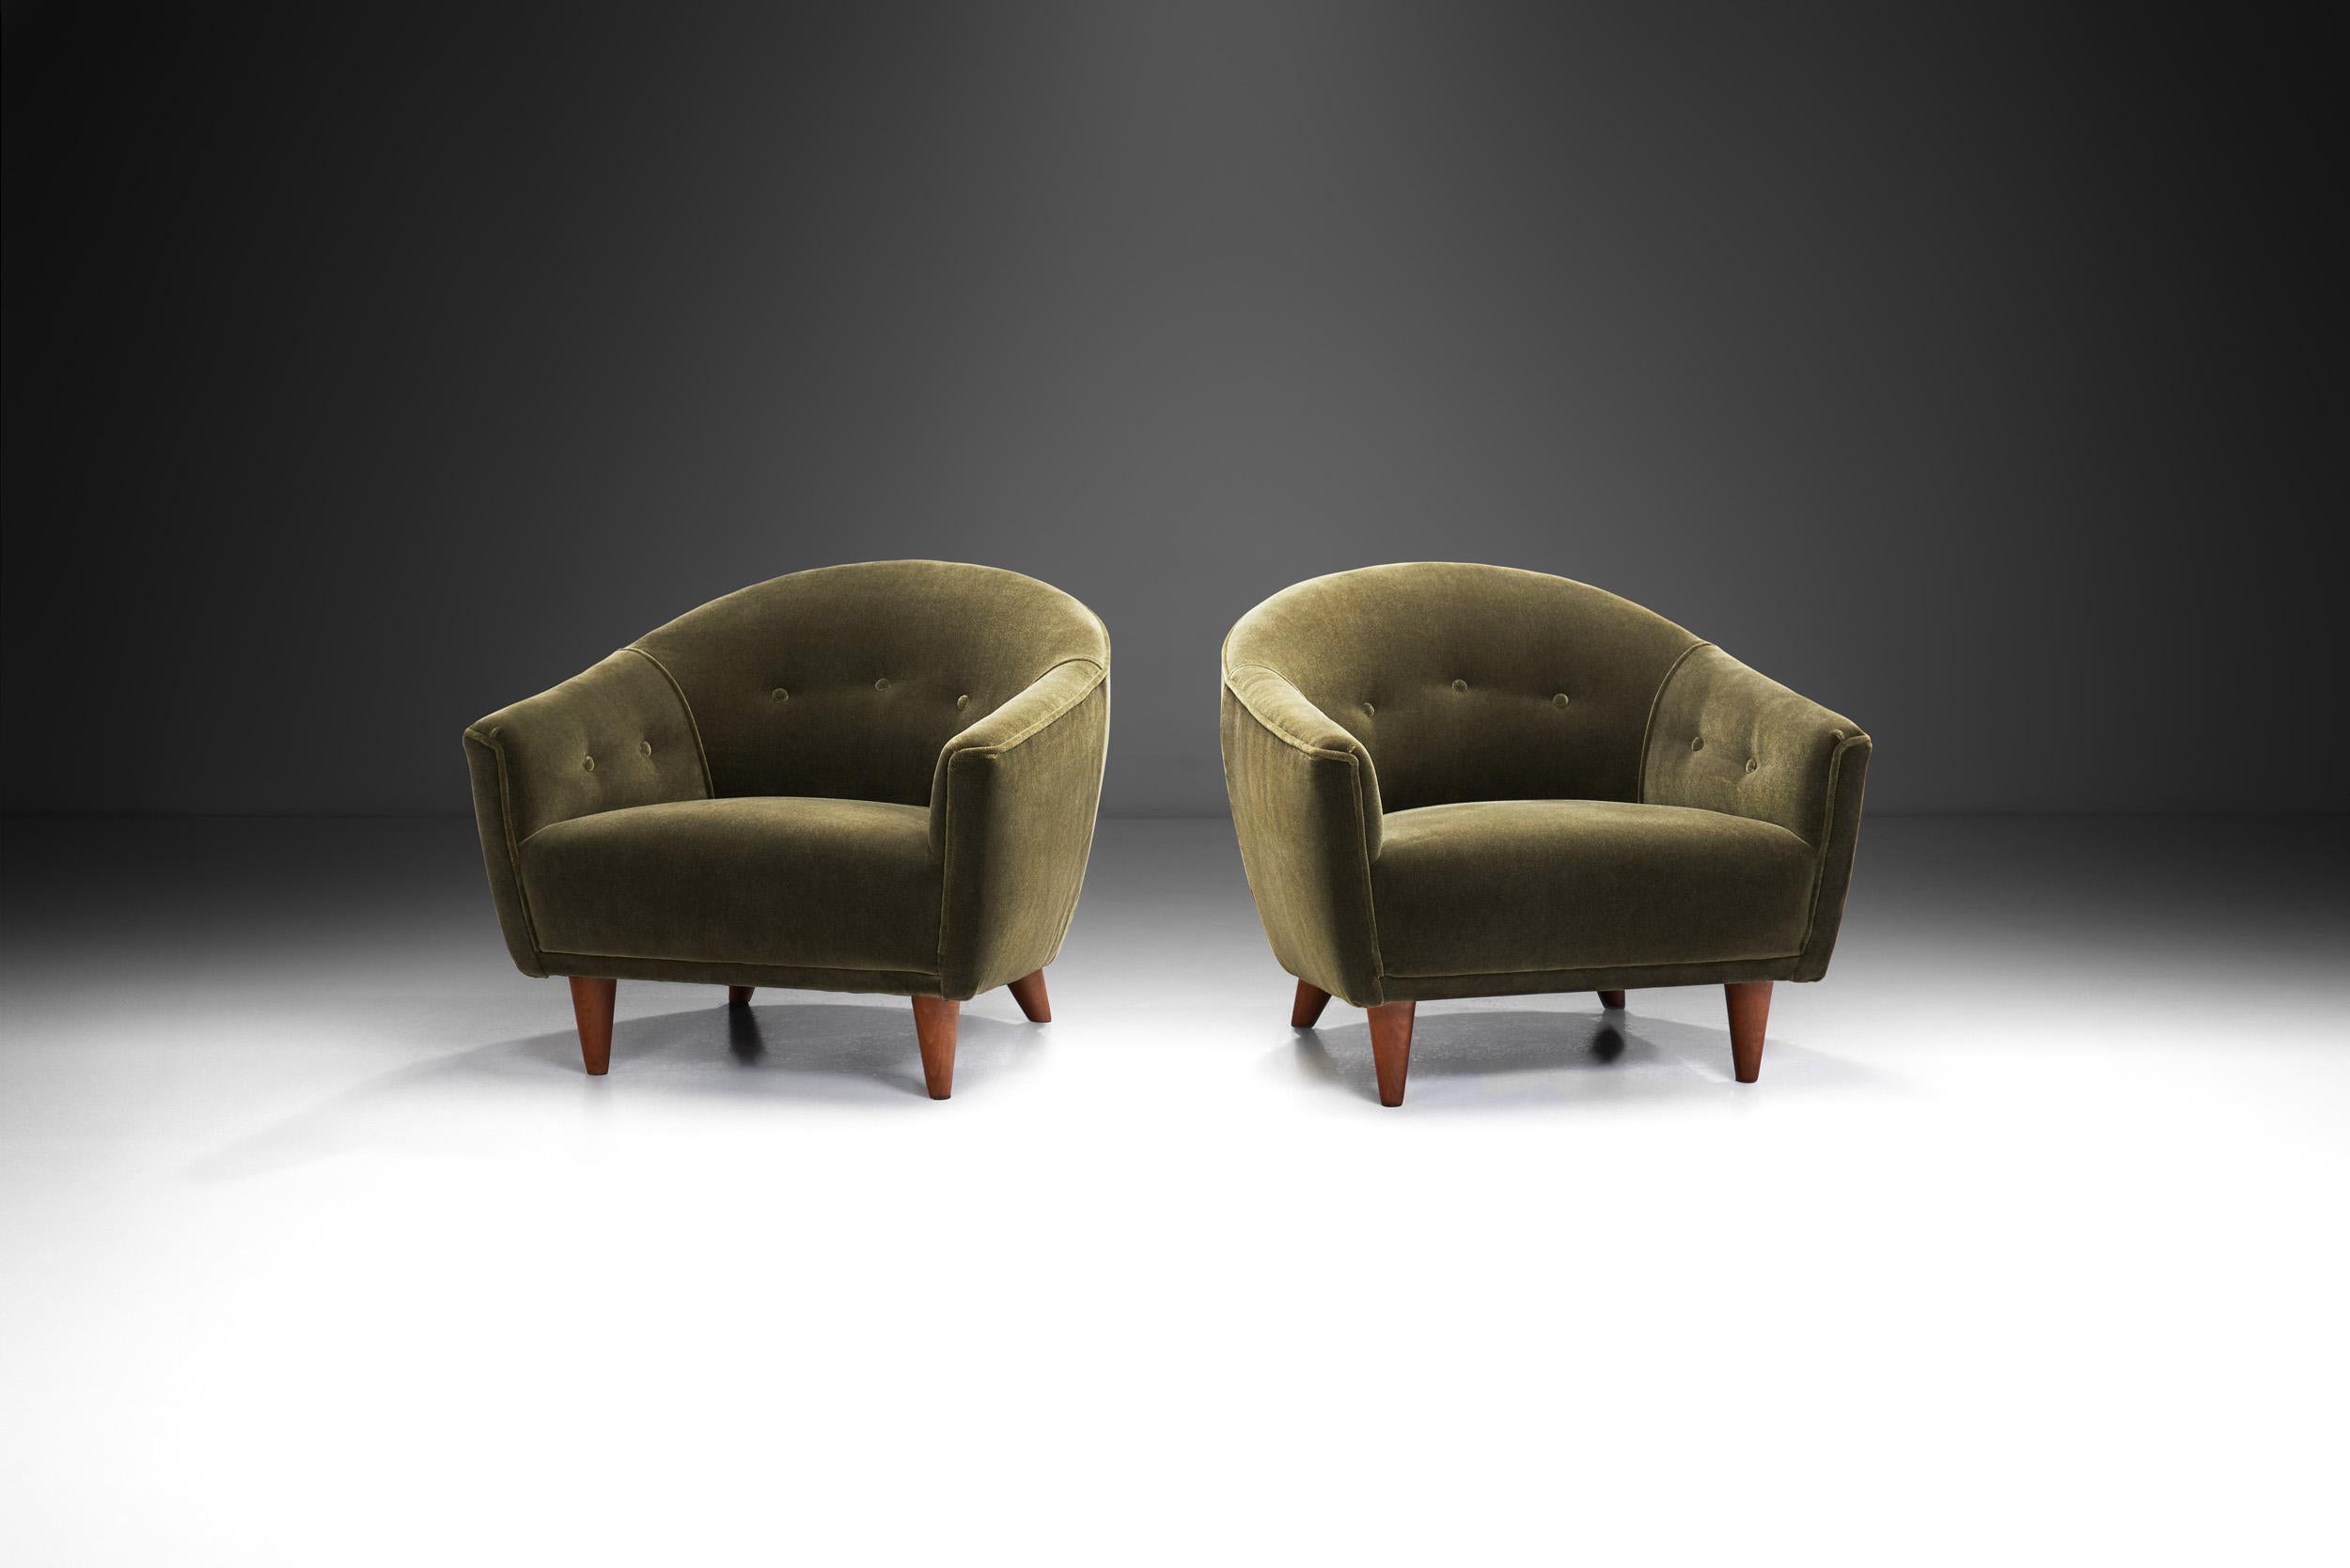 These luxurious lounge chairs embody elegance and comfort in equal measure. With their soft curves and shell-like bodies, they cradle the sitter in a harmonious and just as stylish embrace.

The defining feature of these lounge chairs is their